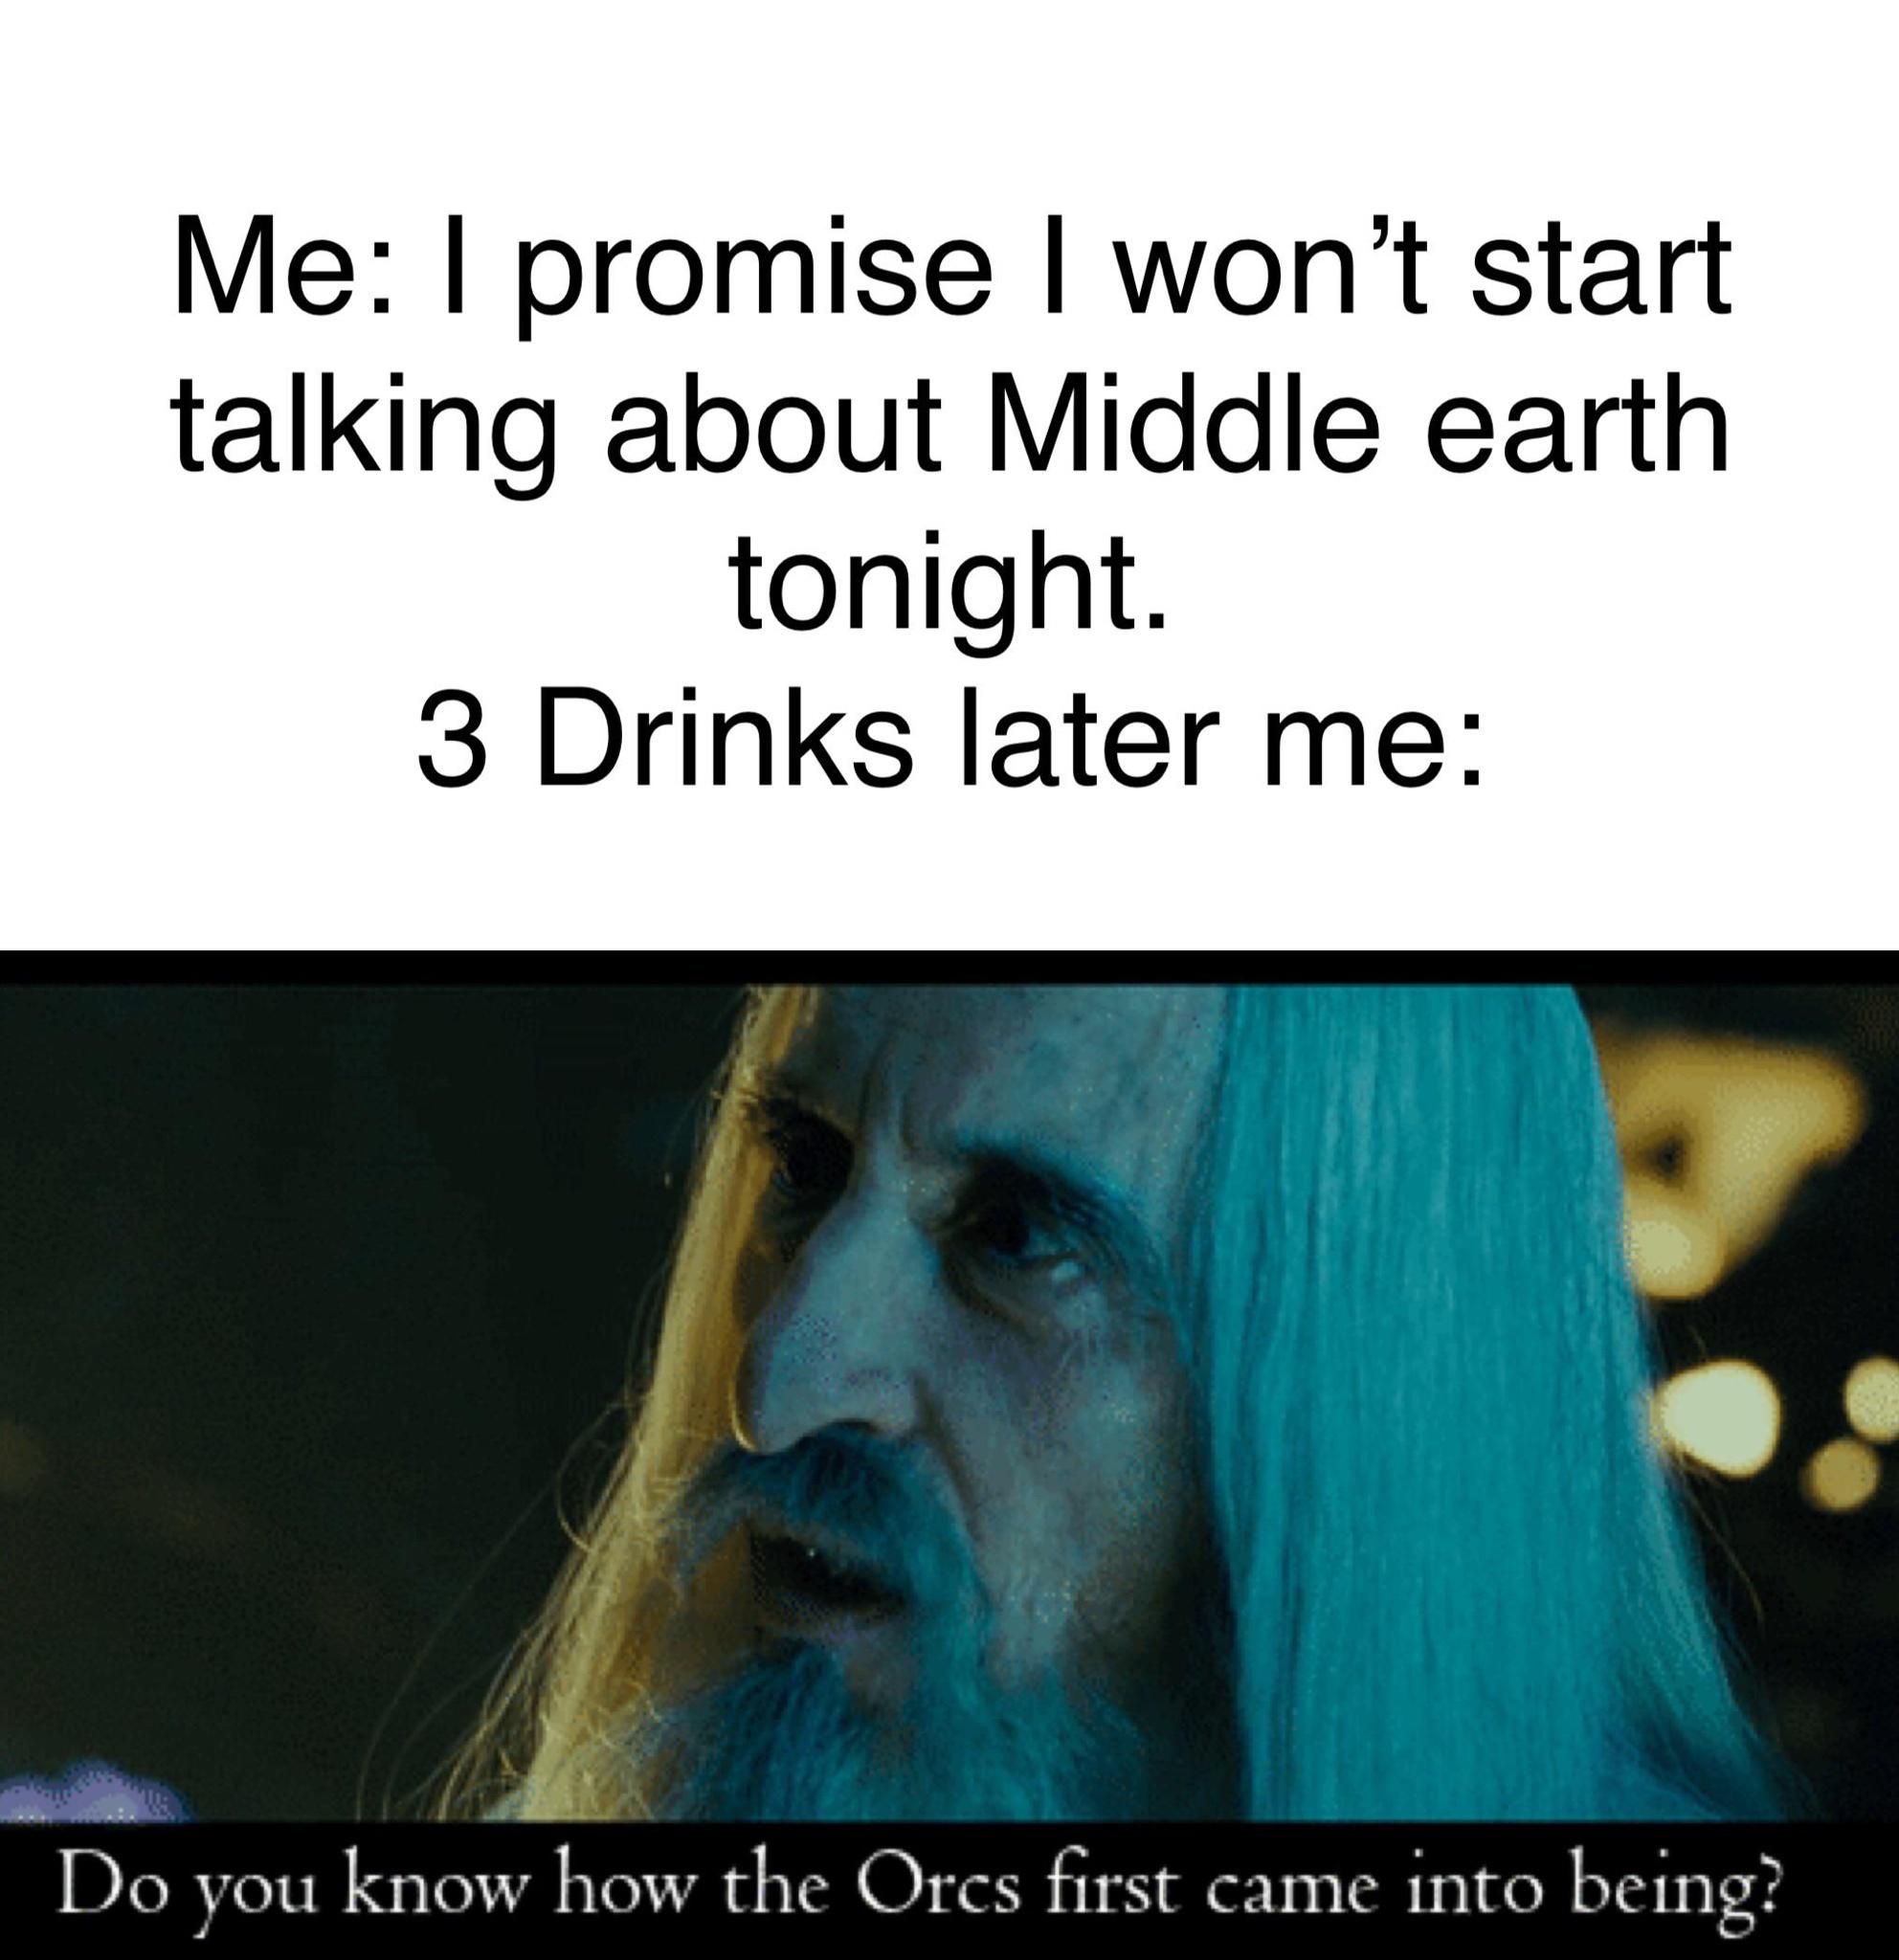 lord of the rings drinking meme - Me I promise I won't start talking about Middle earth tonight. 3 Drinks later me Do you know how the Ores first came into being?